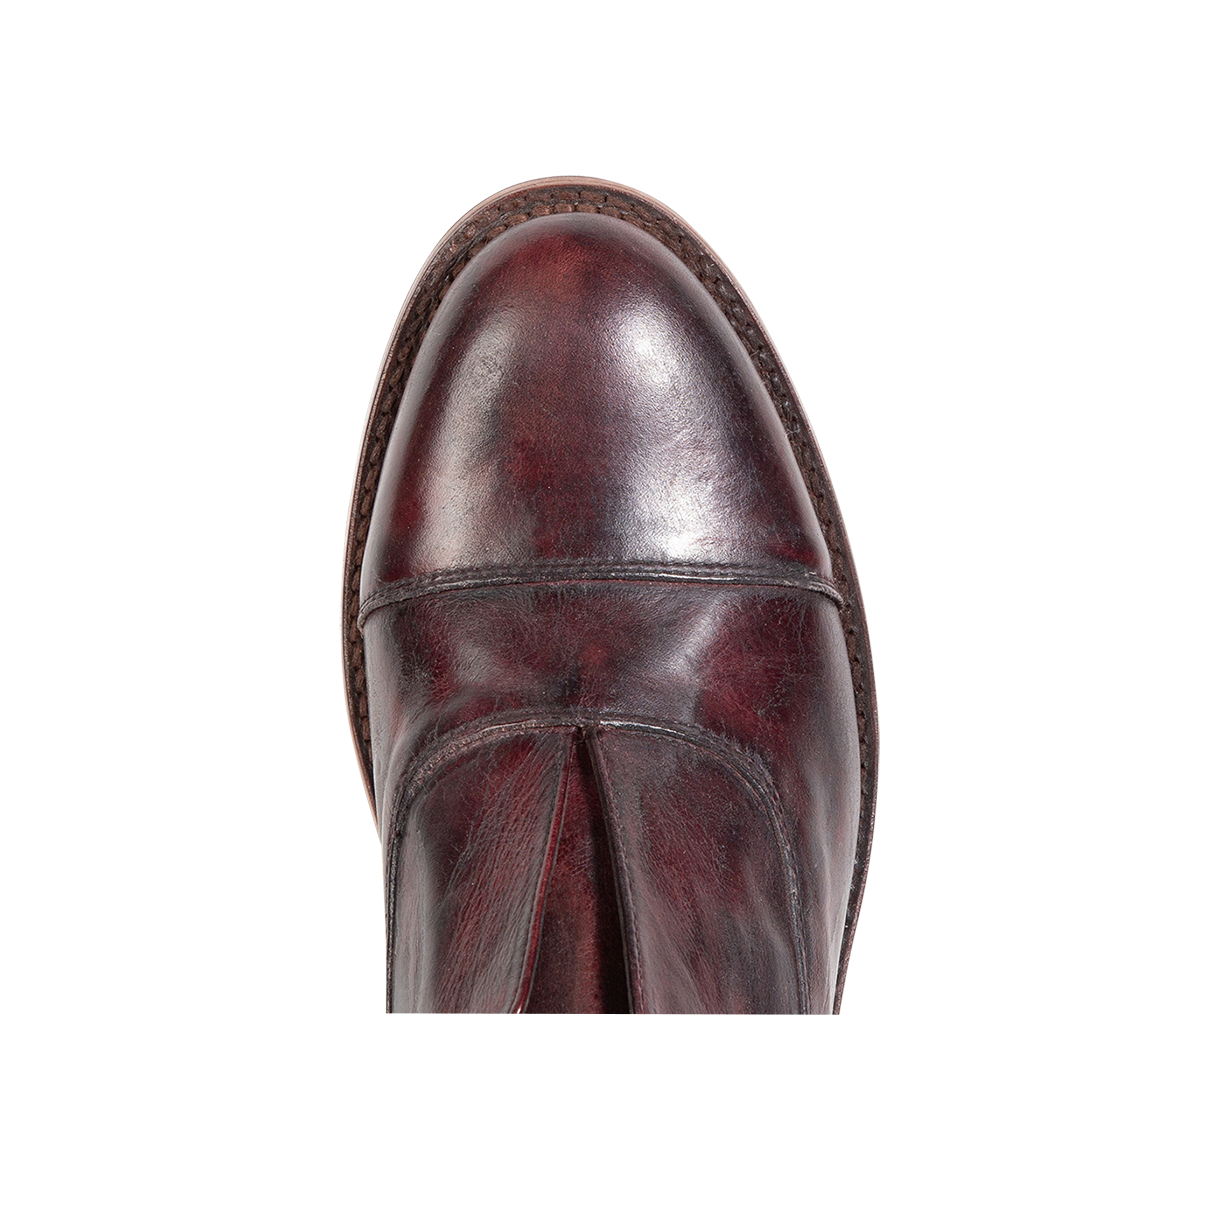 Top view showing almond toe and loafer construction on FREEBIRD men's Detrick wine shoe